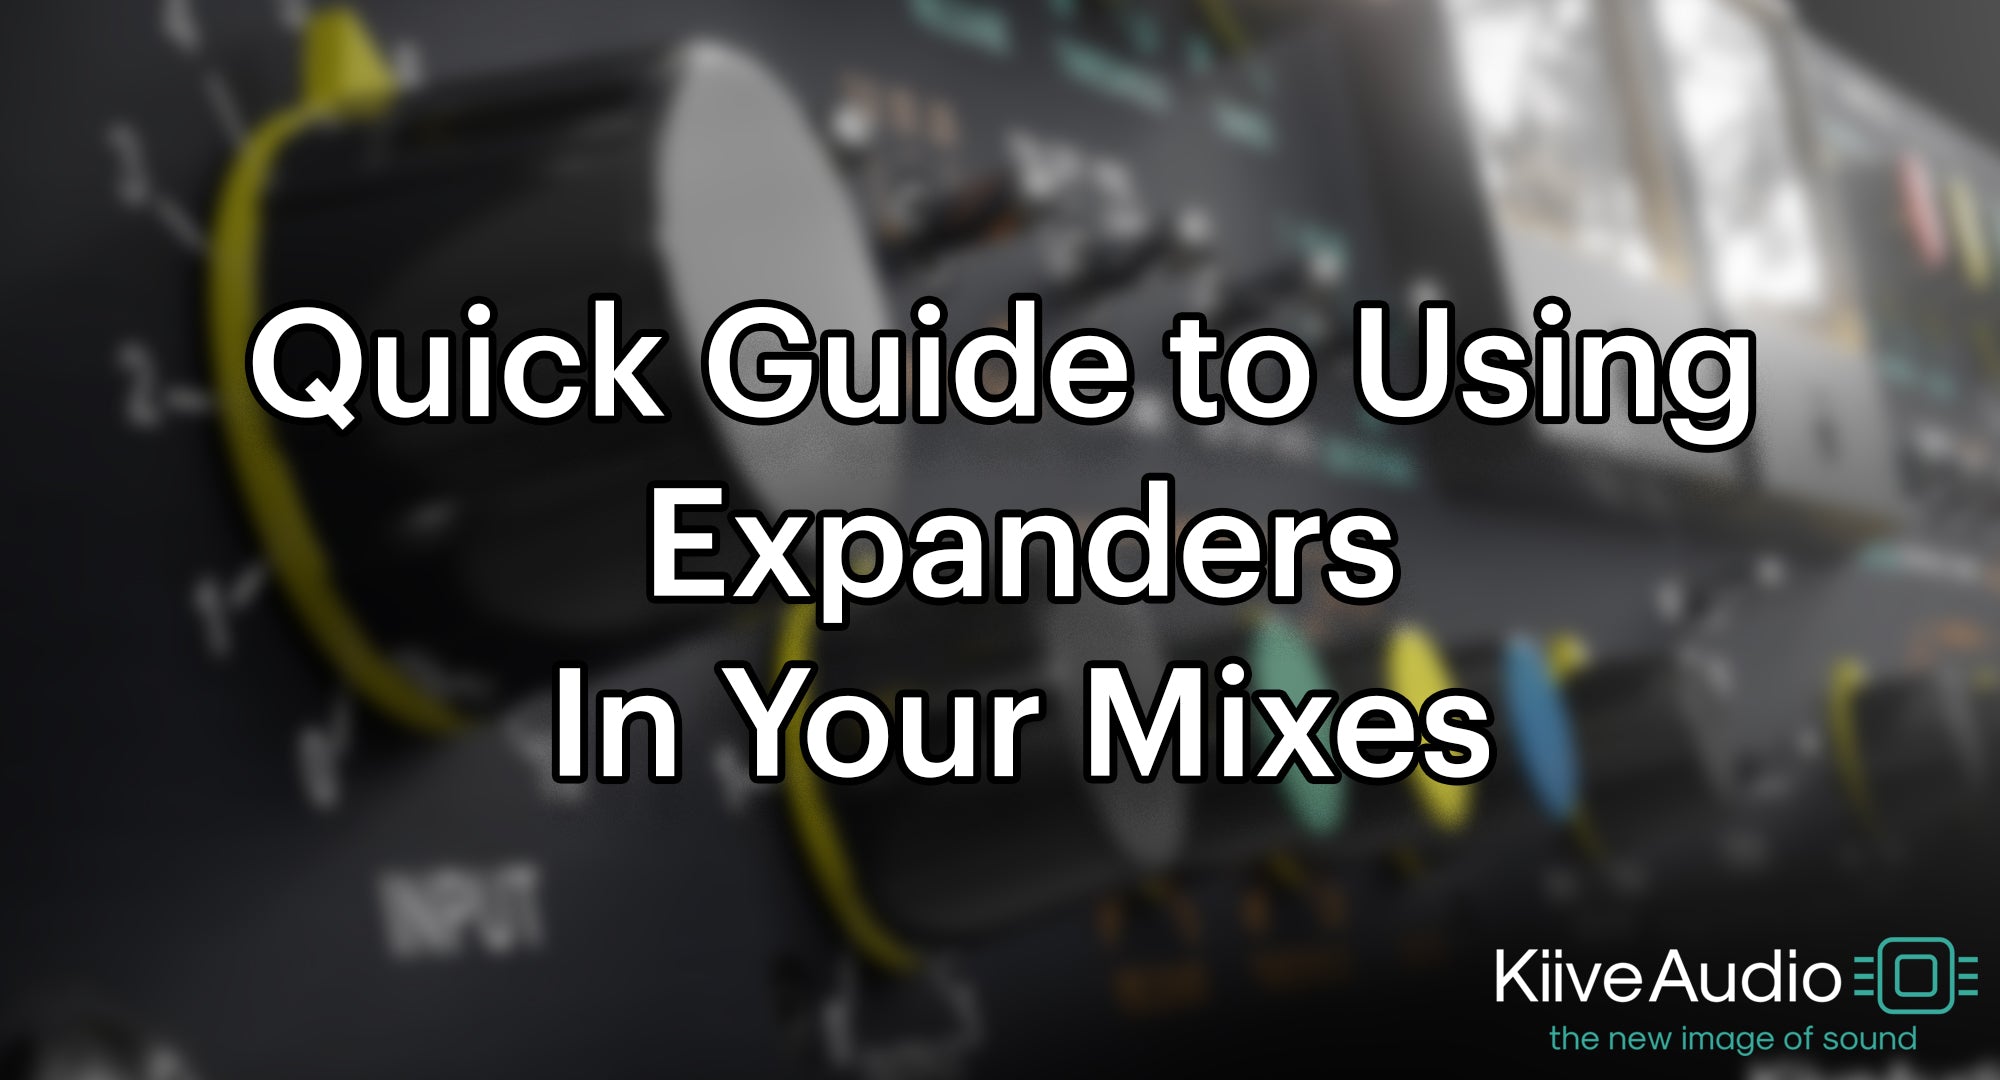 Quick Guide to Using Expanders in Your Mixes